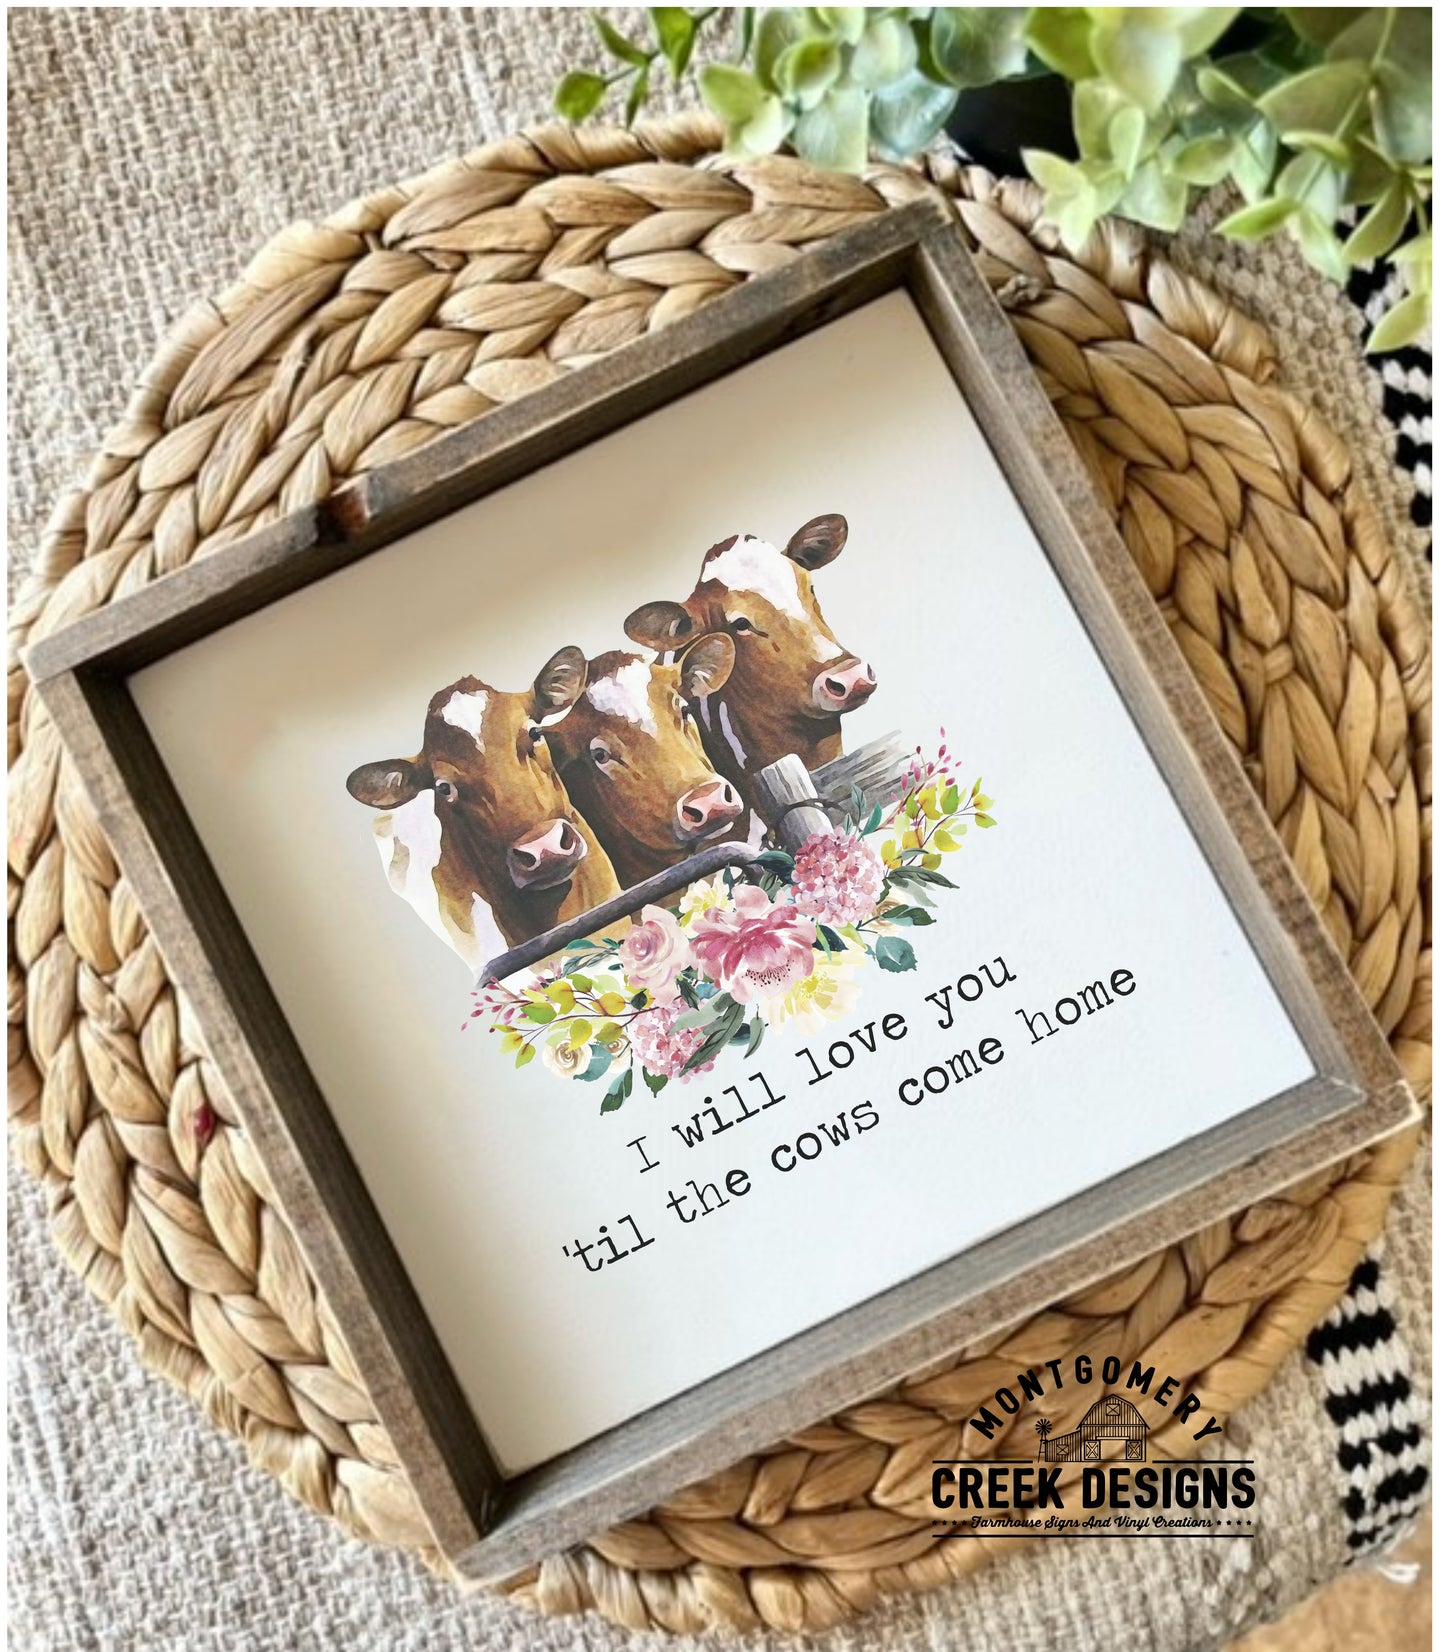 I Will Love You 'Til The Cows Come Home Small Framed Sign